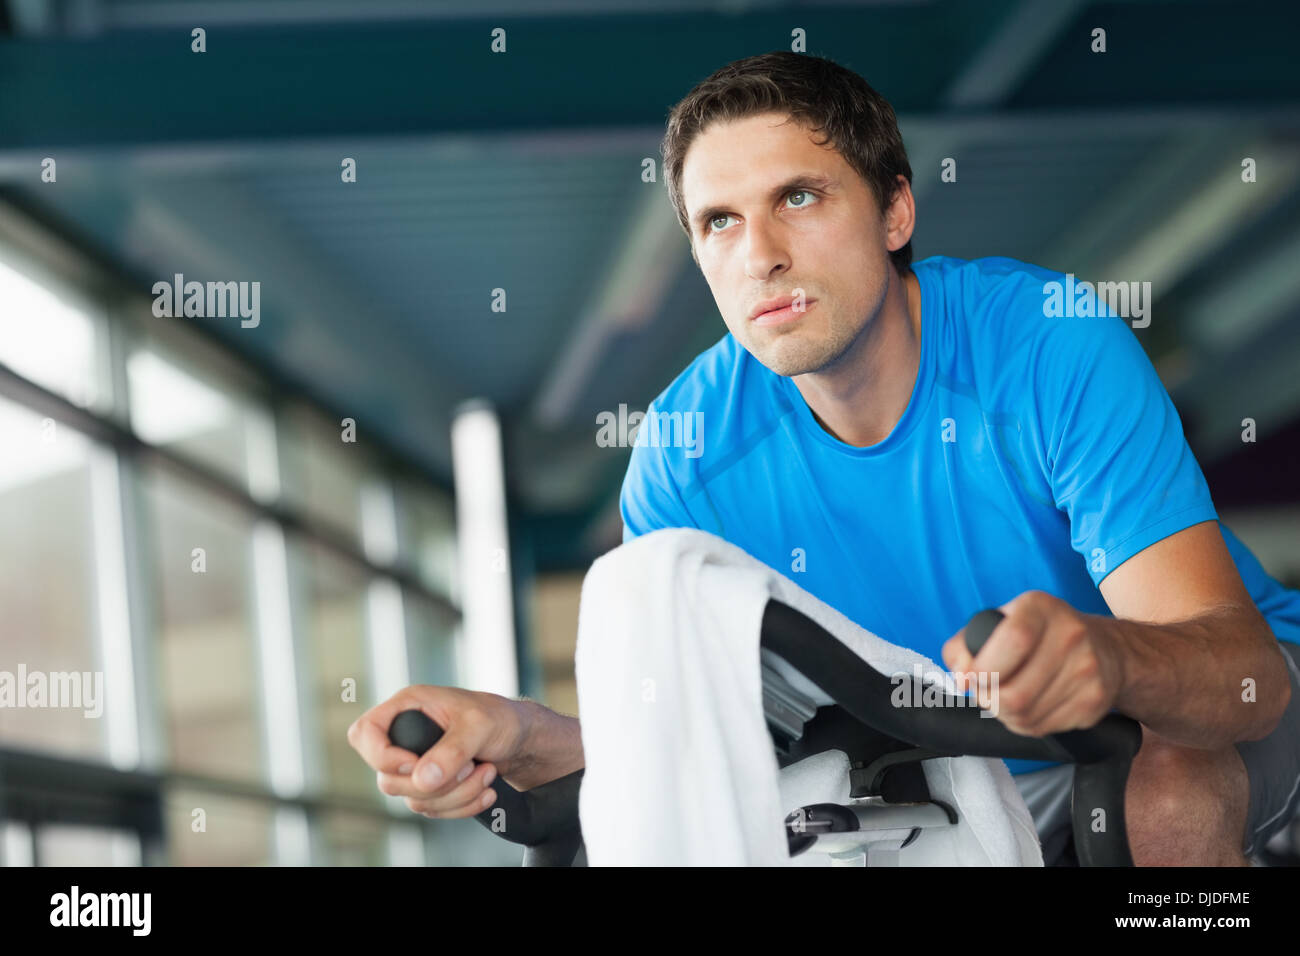 Determined young man working out at spinning class Stock Photo